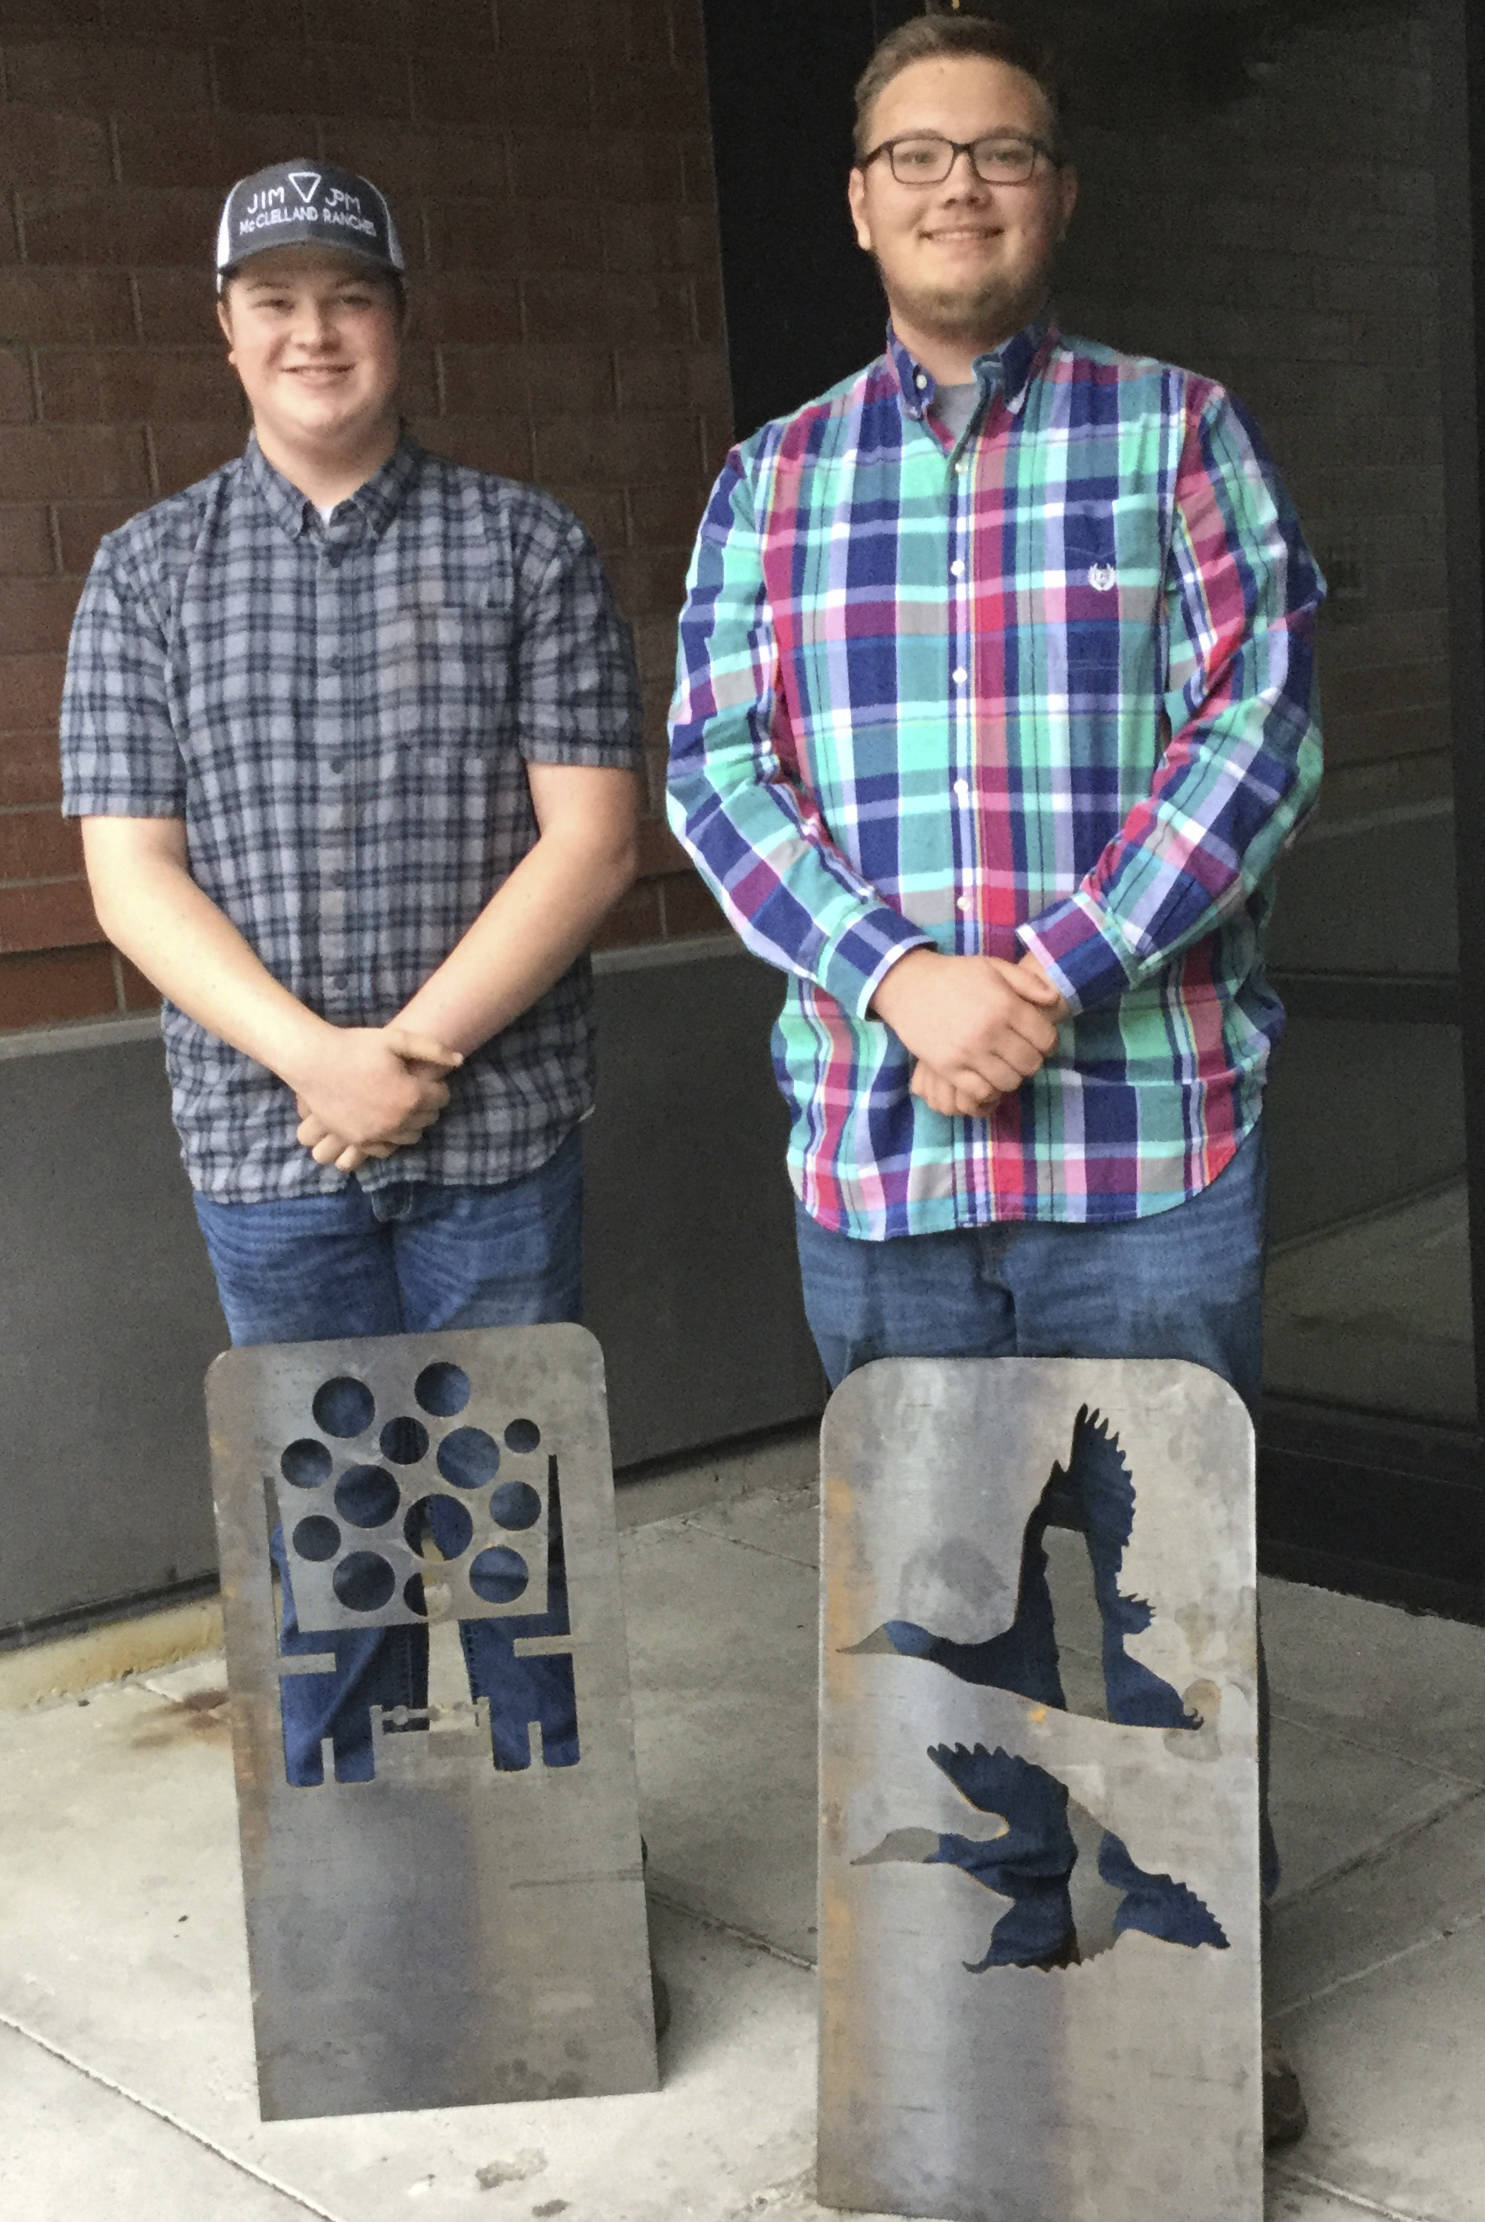 From left, Arlington High School welding students Hunter Urionaguena and Ian Seward display the artistic shadow bike racks they designed as part of a school project. The pieces are called “shadow” racks because they cast a shadow on the ground of the image cut into the metal. The racks will be installed downtown in front of various stores.